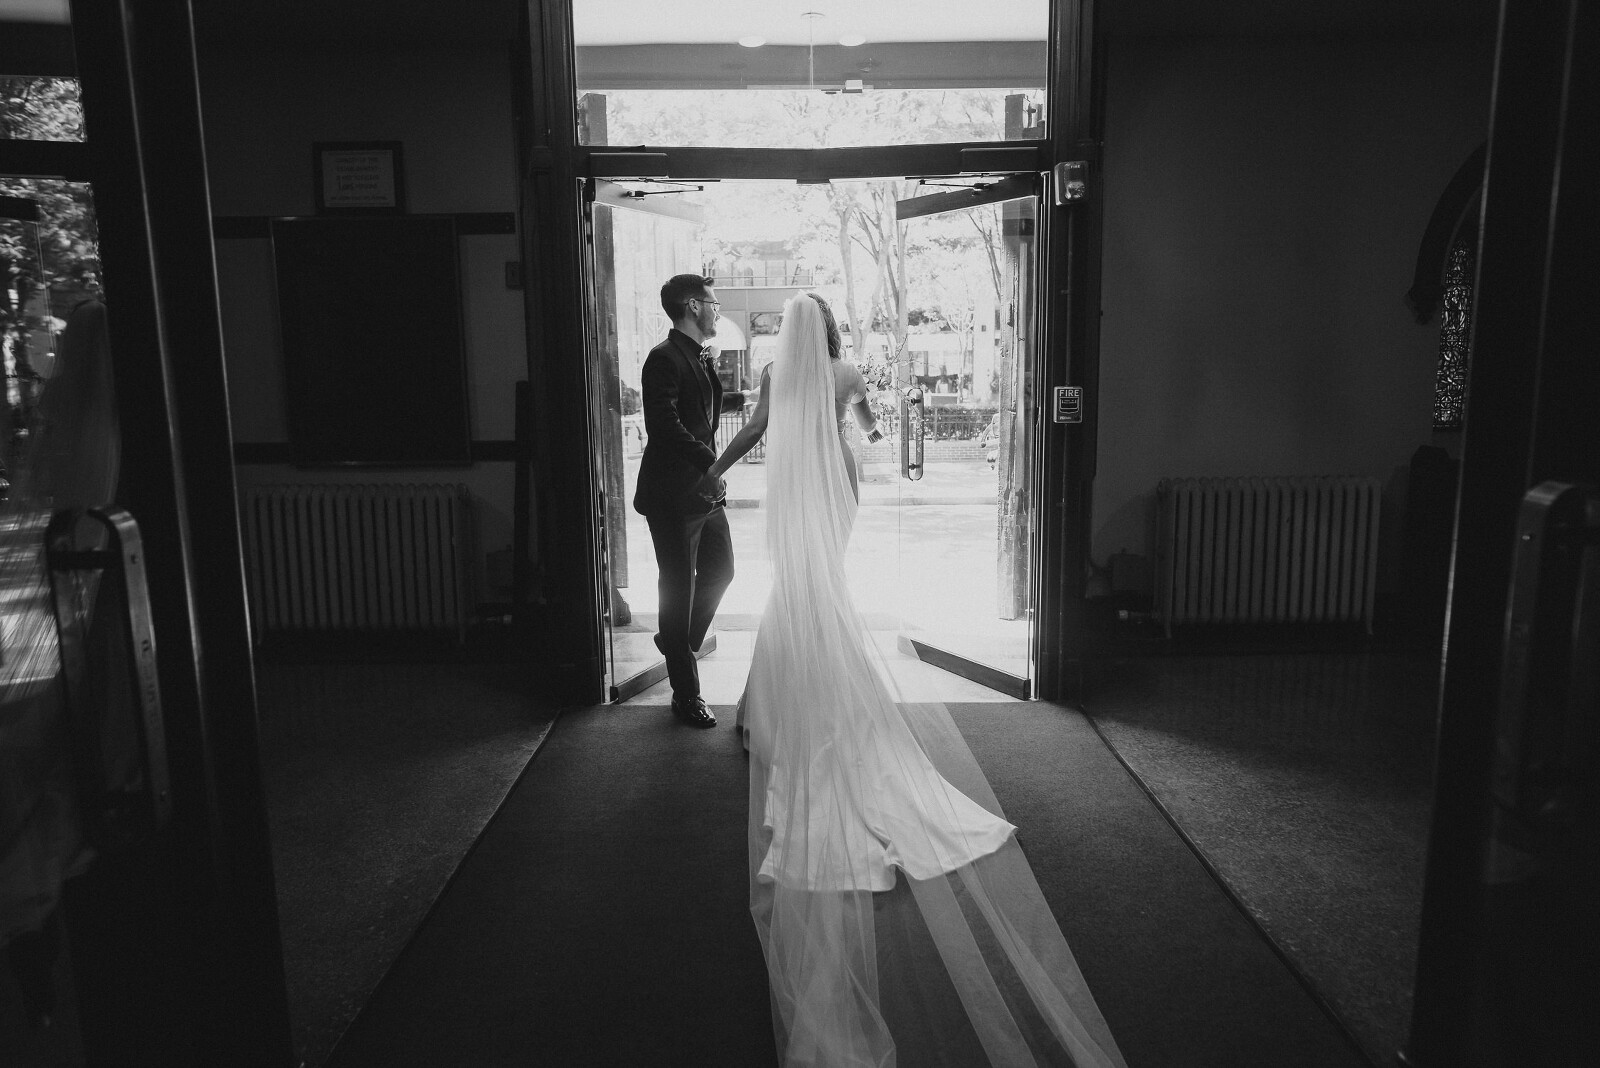 Bride and groom dramatically leaving ceremony